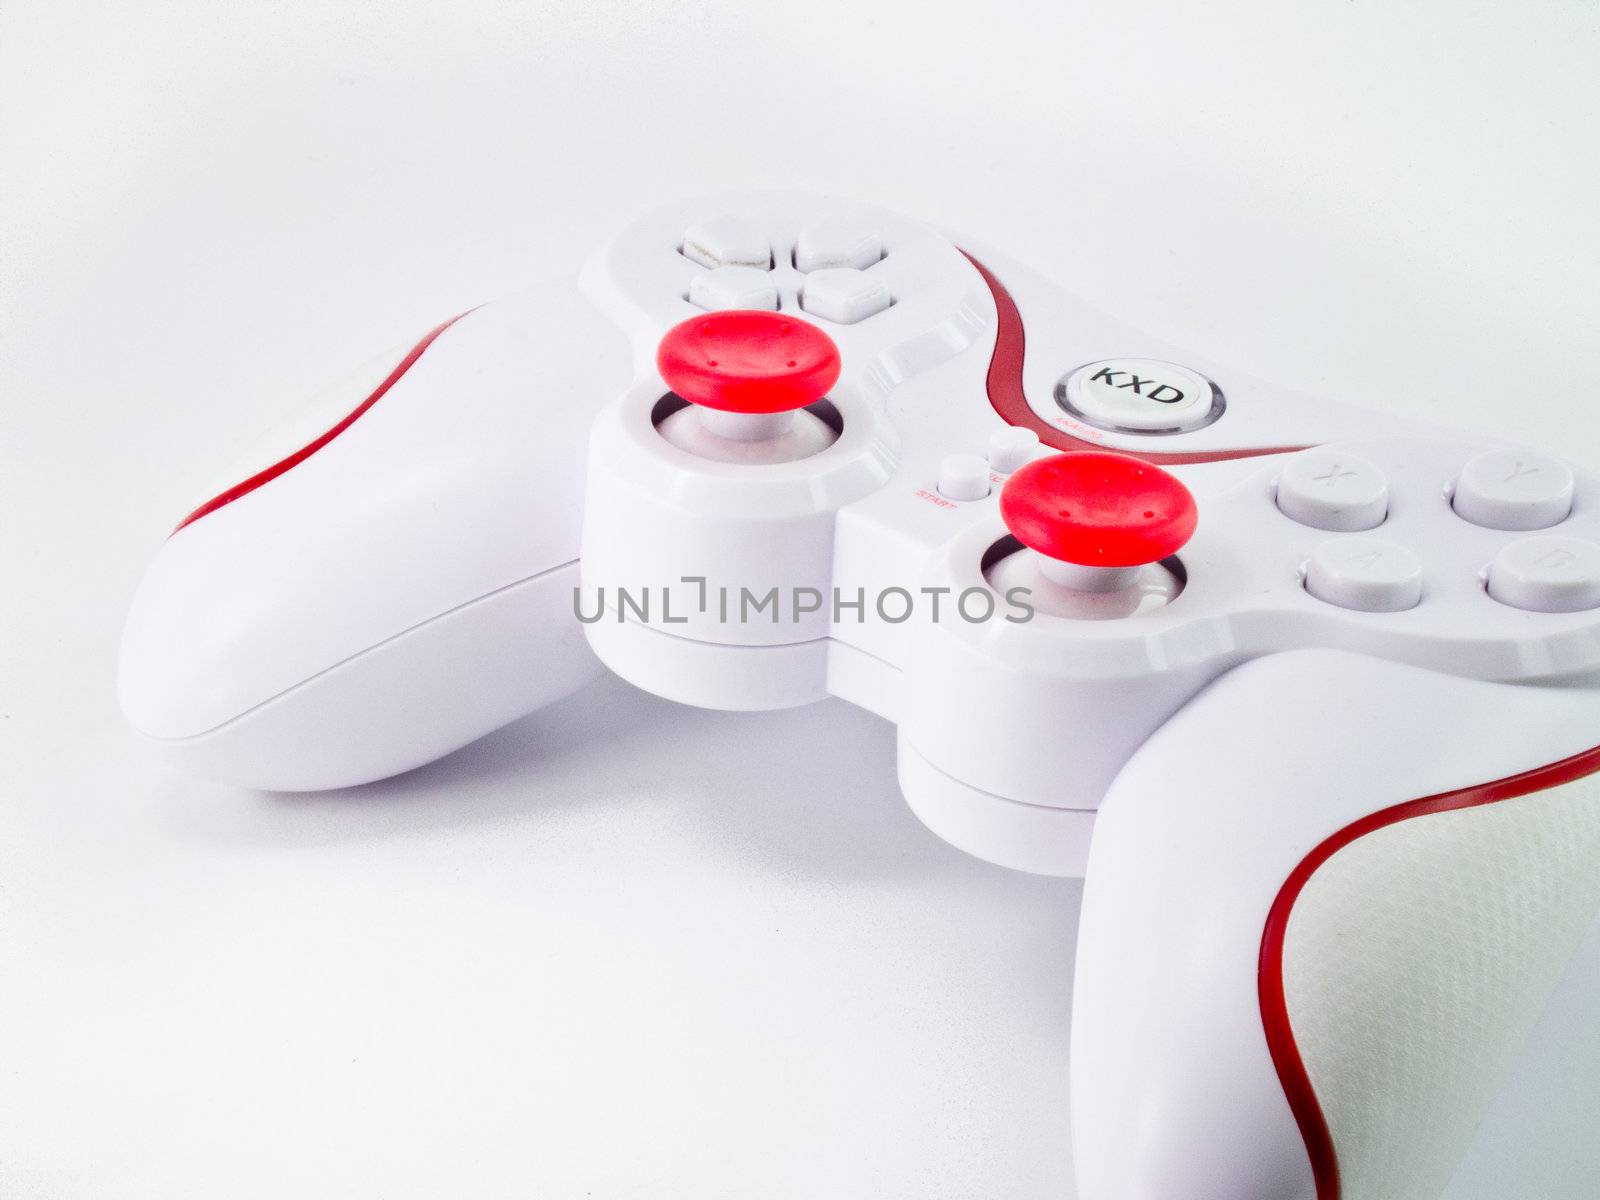 This is a joystick on white background